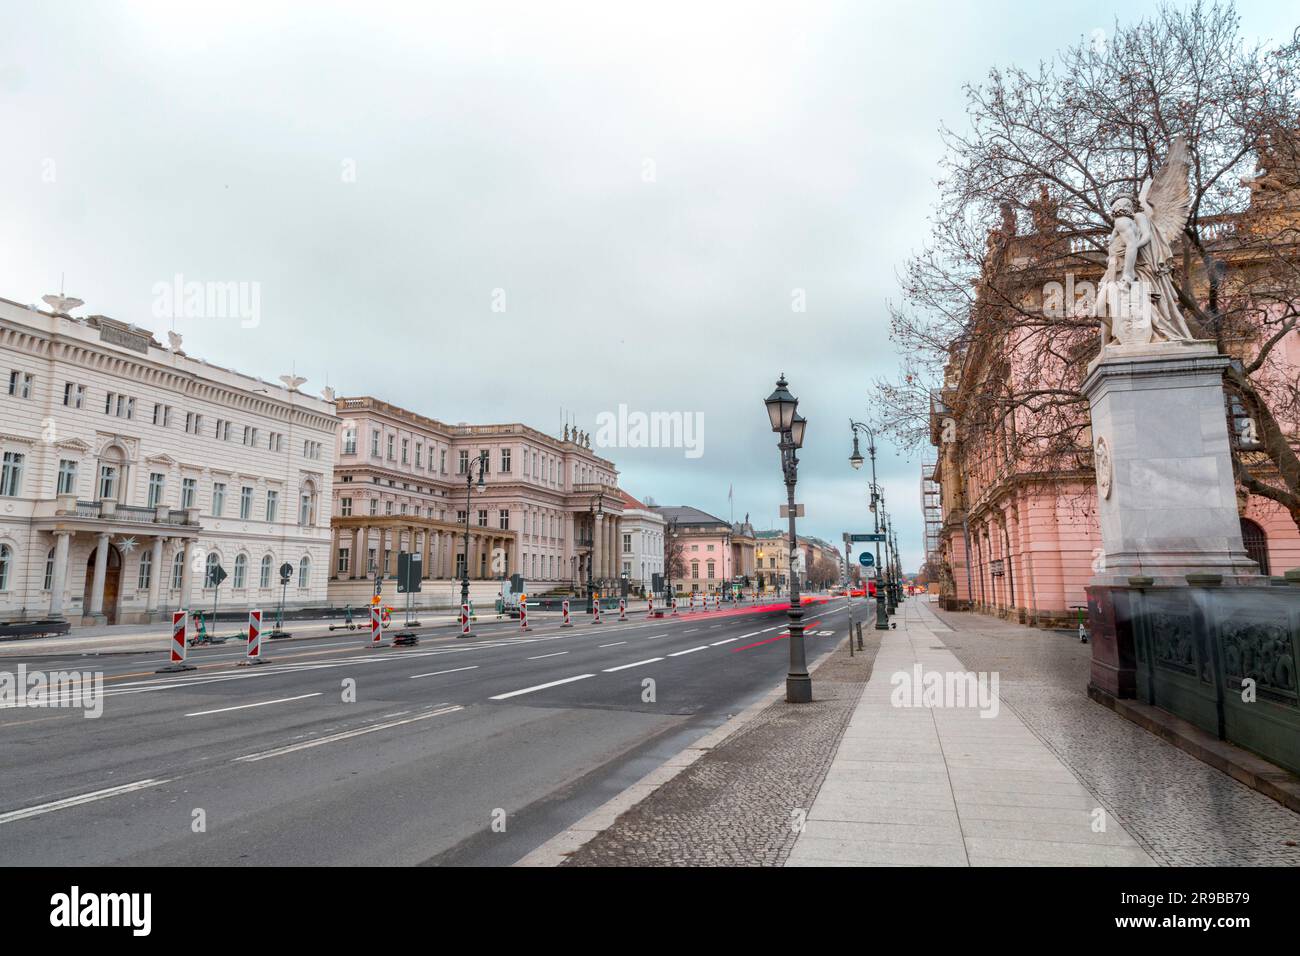 Berlin, Germany - 17 DEC 2021: Unter den Linden is a boulevard in the central Mitte district of Berlin, the capital of Germany. Stock Photo